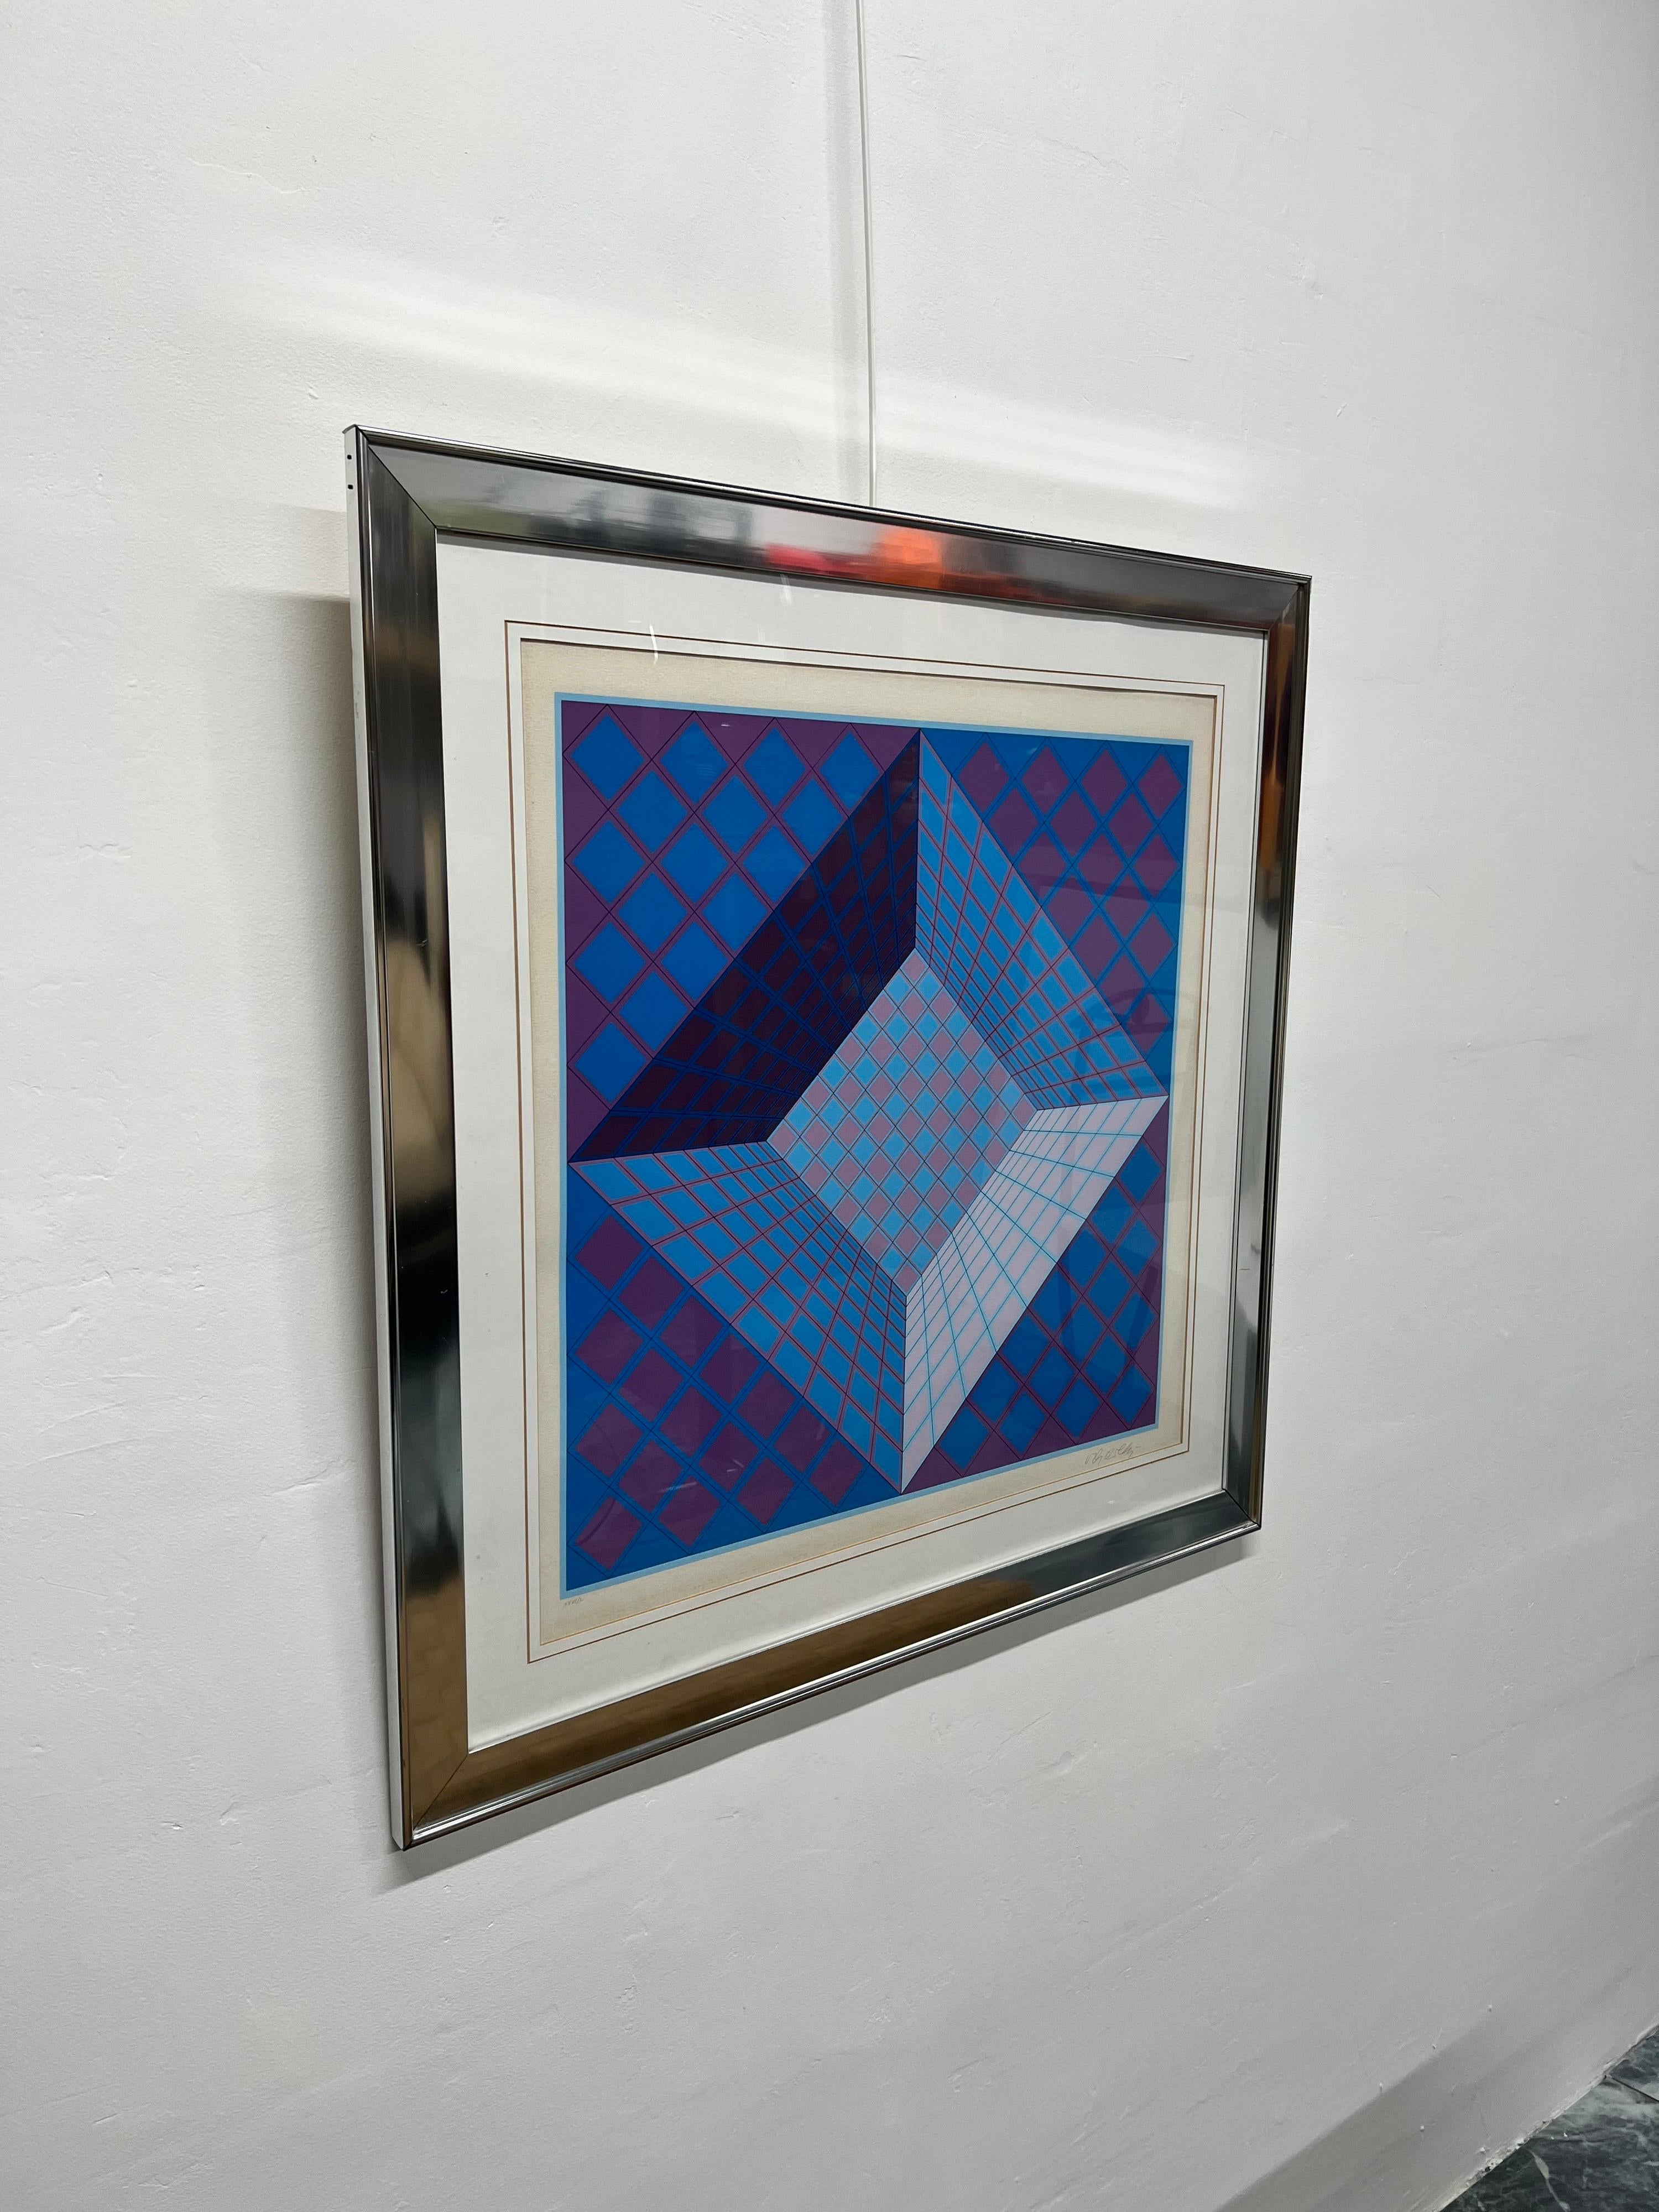 Victor Vasarely (French-Hungarian 1908 - 1997) lithograph on paper, optical art illusion with cubes. The work is signed and numbered in pencil and maintains original aluminum frame. This particular work depicts an optical illusion with geometric